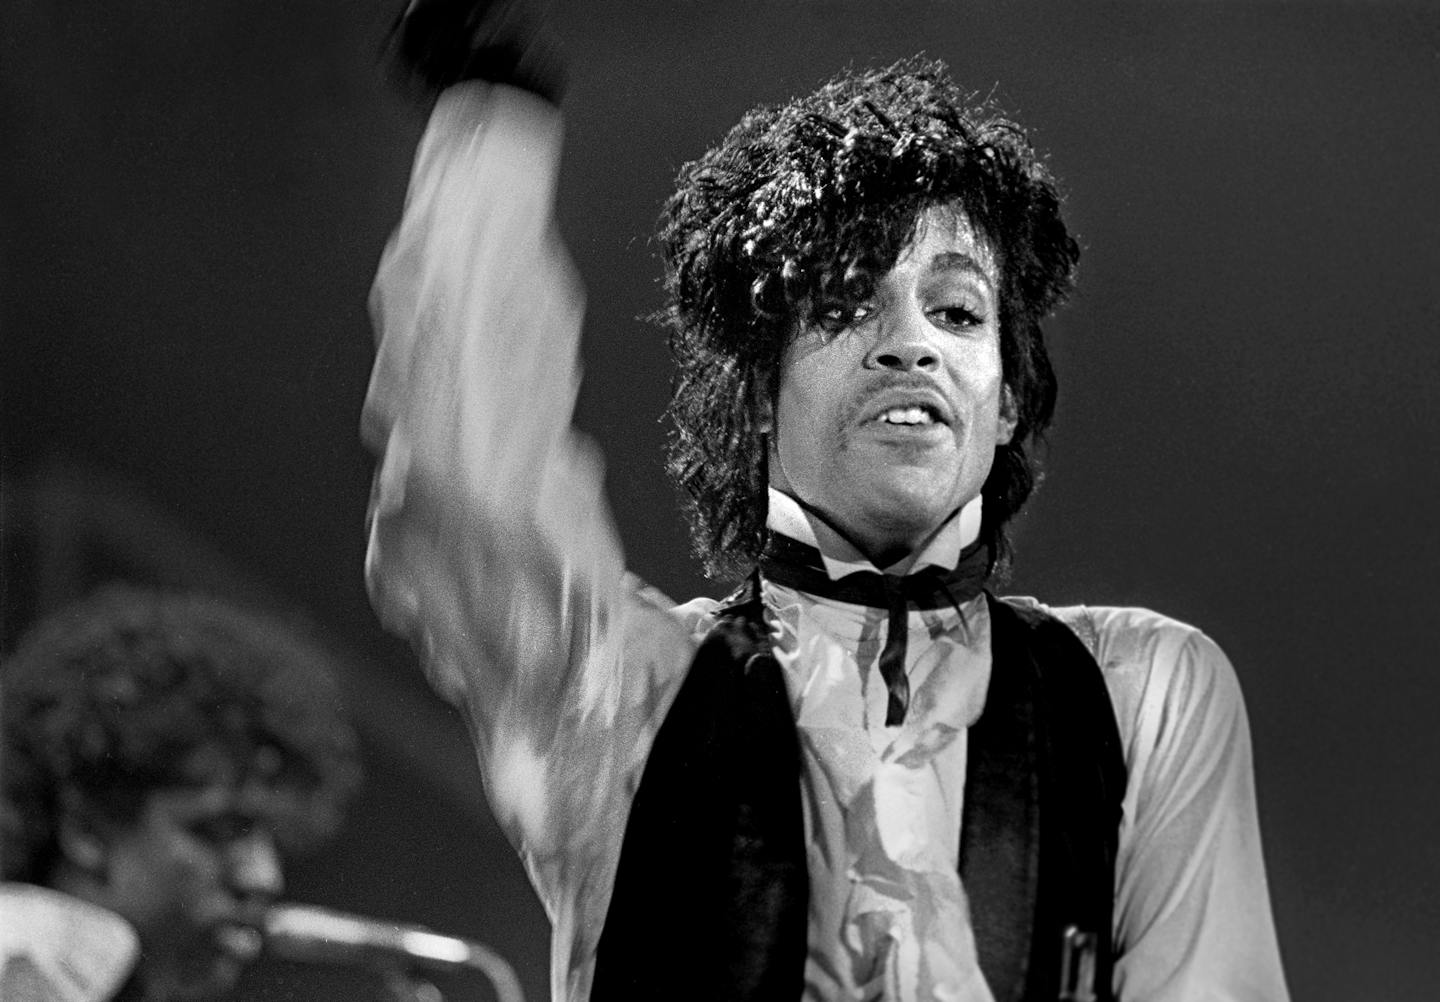 Our Prince wish list: 12 more items we hope to unearth from his 